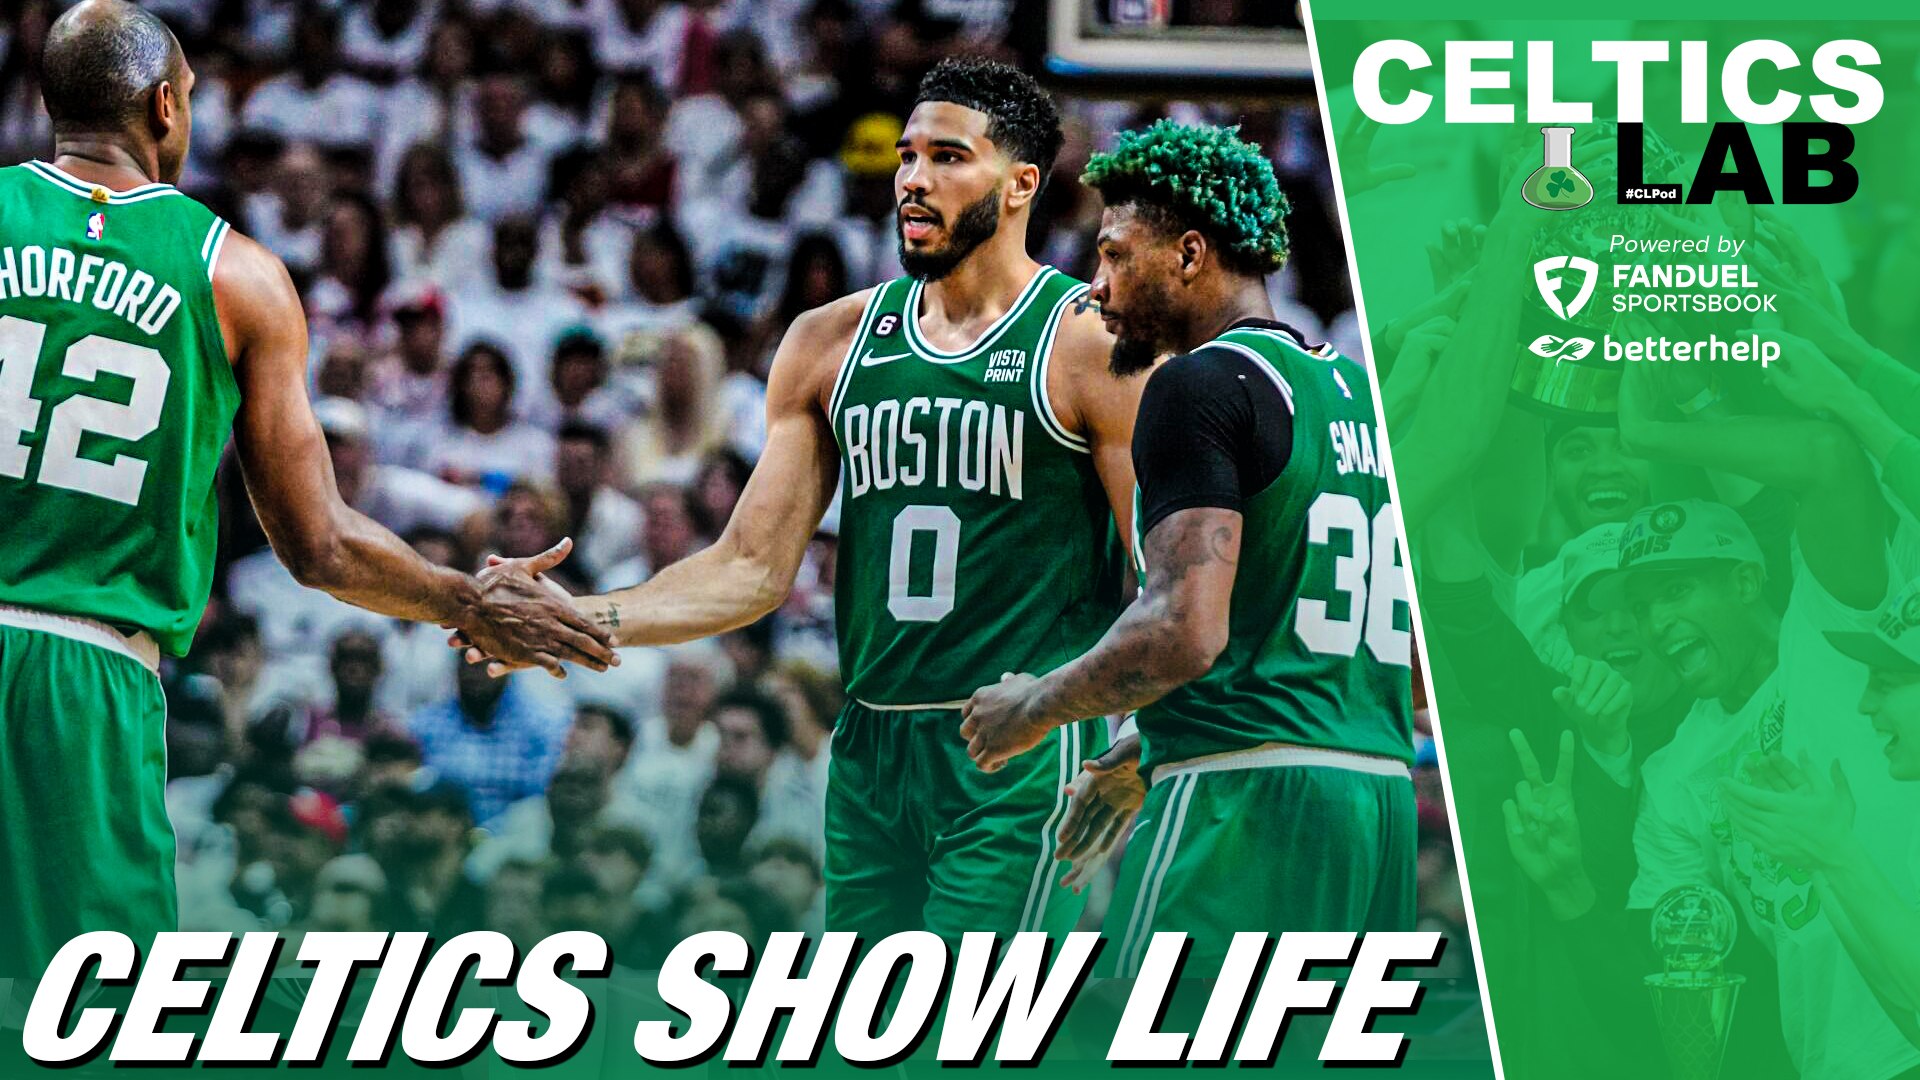 Boston lives to fight another day, force Game 5 at home Celtics Lab